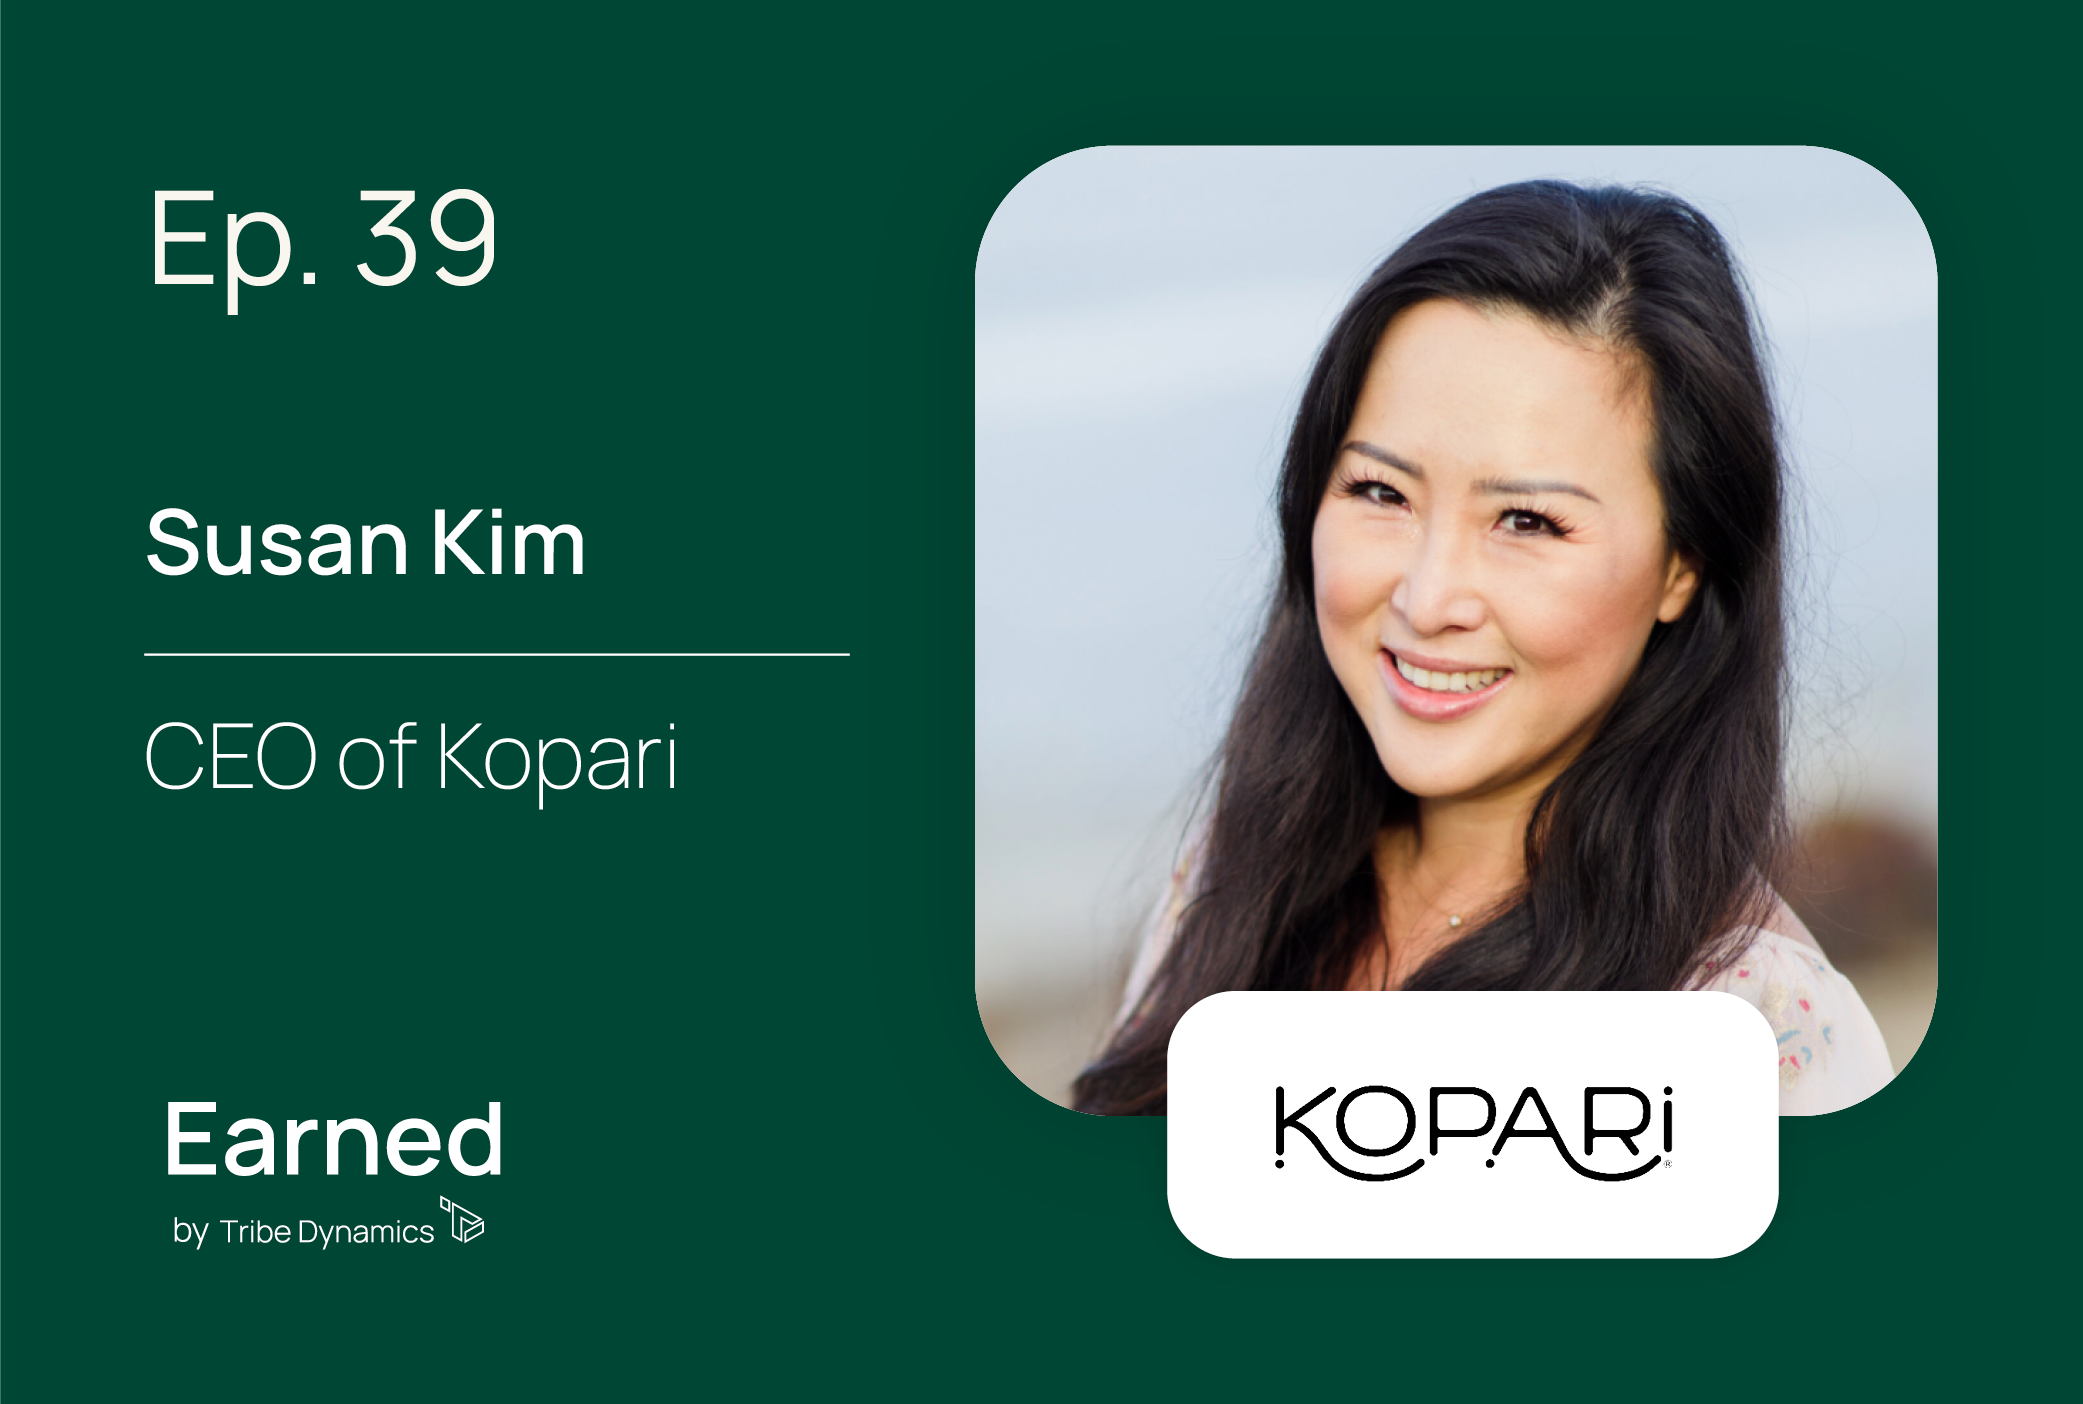 Earned Ep. 39: Kopari CEO Susan Kim on the Importance of Brand DNA and Top-of-Funnel Awareness